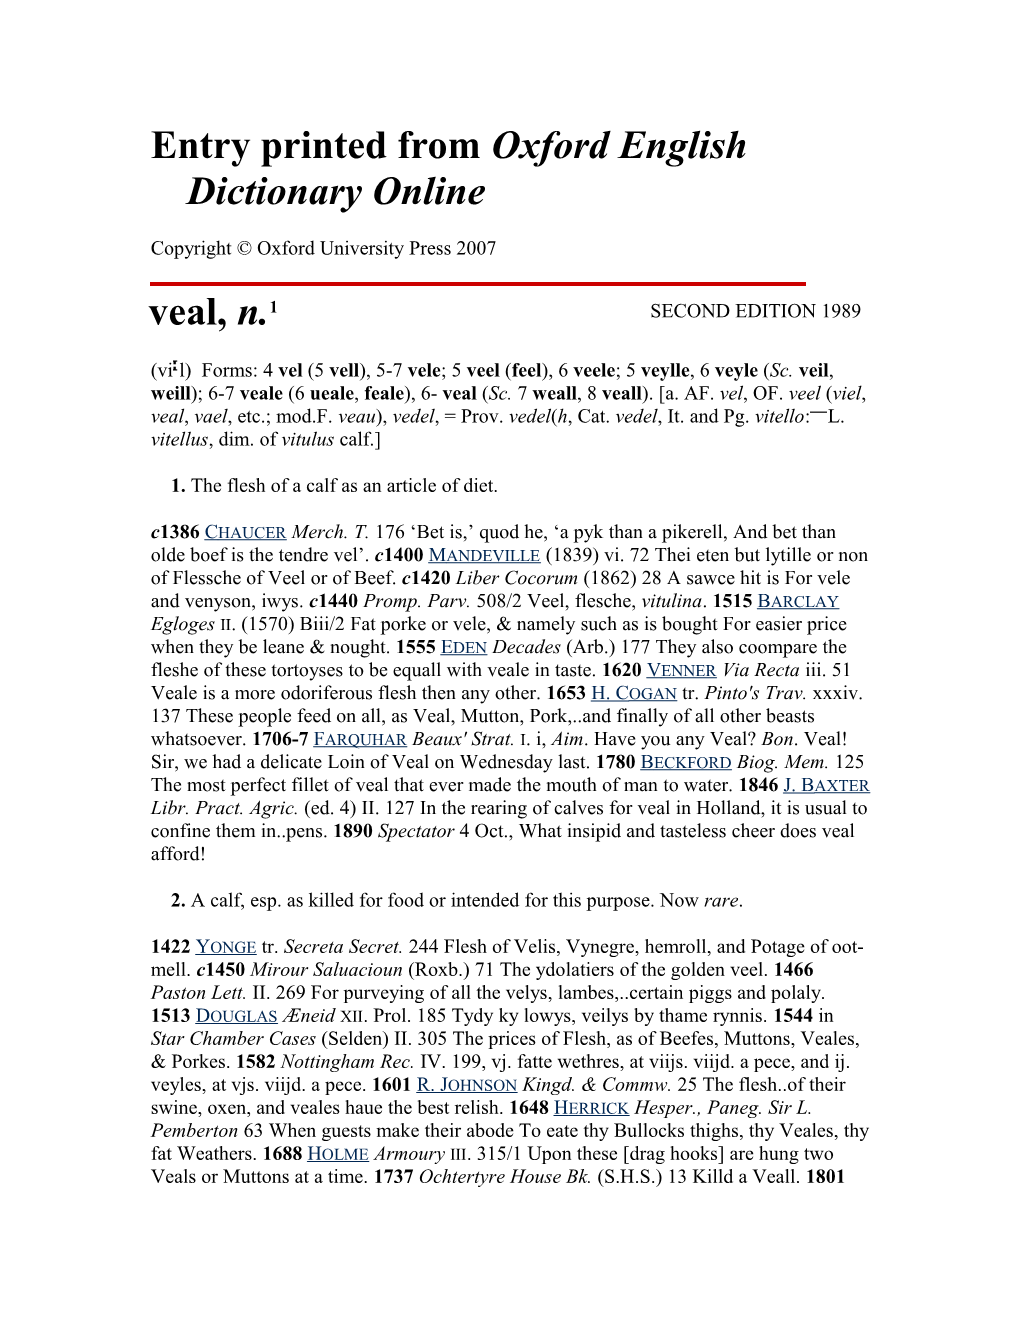 Entry Printed from Oxford English Dictionary Online